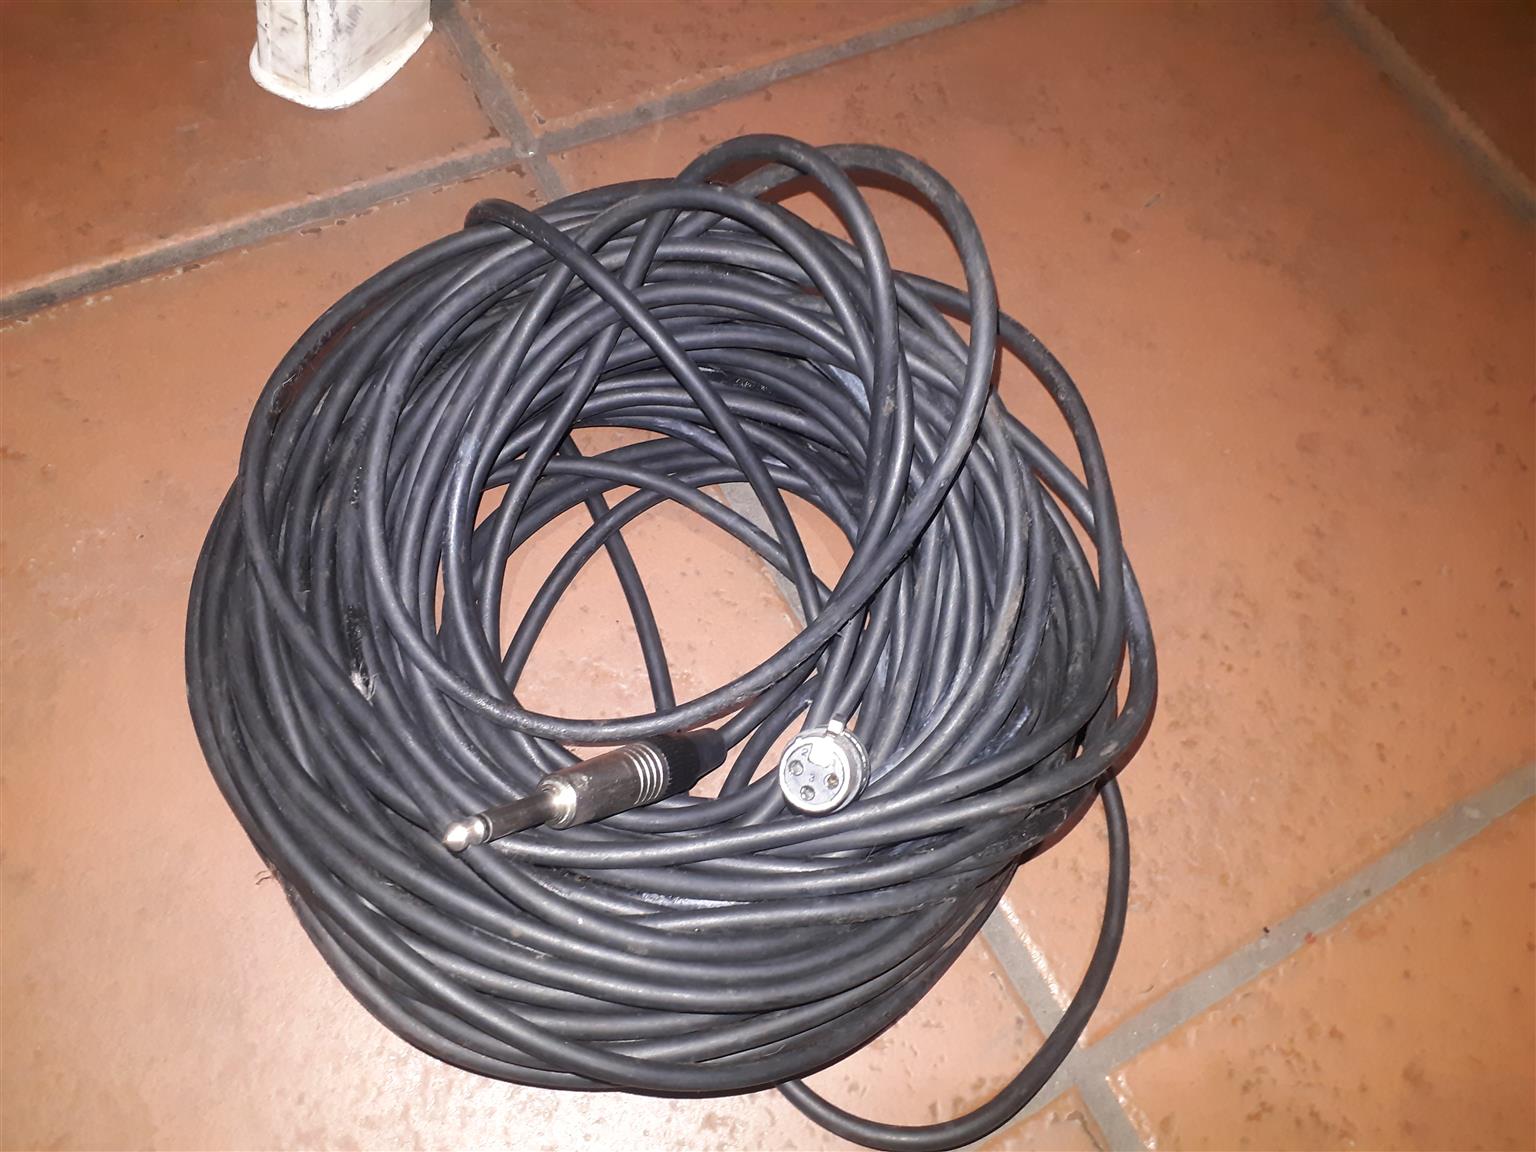 Ewi snake cable & cables